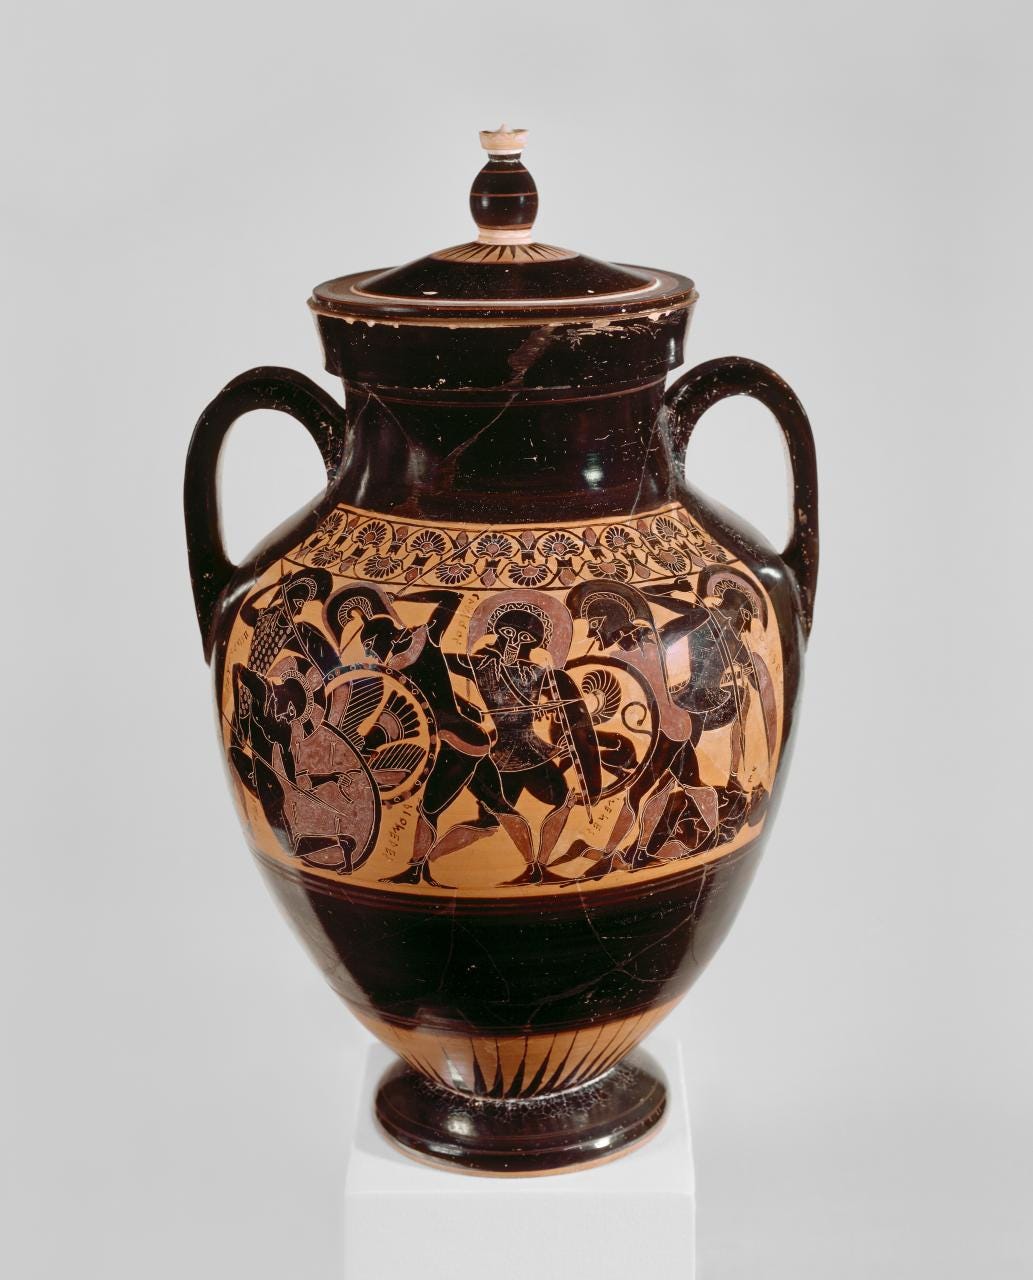 Red figure vase: Side A: Scene of fighting from the Trojan War; Achilles dismounts from his chariot to kill the fallen Eurymachus. Side B: Scenes of fighting from the Trojan War, with Glaucus (frontal, centre) and Menestheus. Subsidiary decoration: rays from the base and a lotus/palmette band above the panel. Much added red and white for details. There are holes at the base of the handles and a channel/drain hole in the base, suggesting the vessel was used for cooling wine.